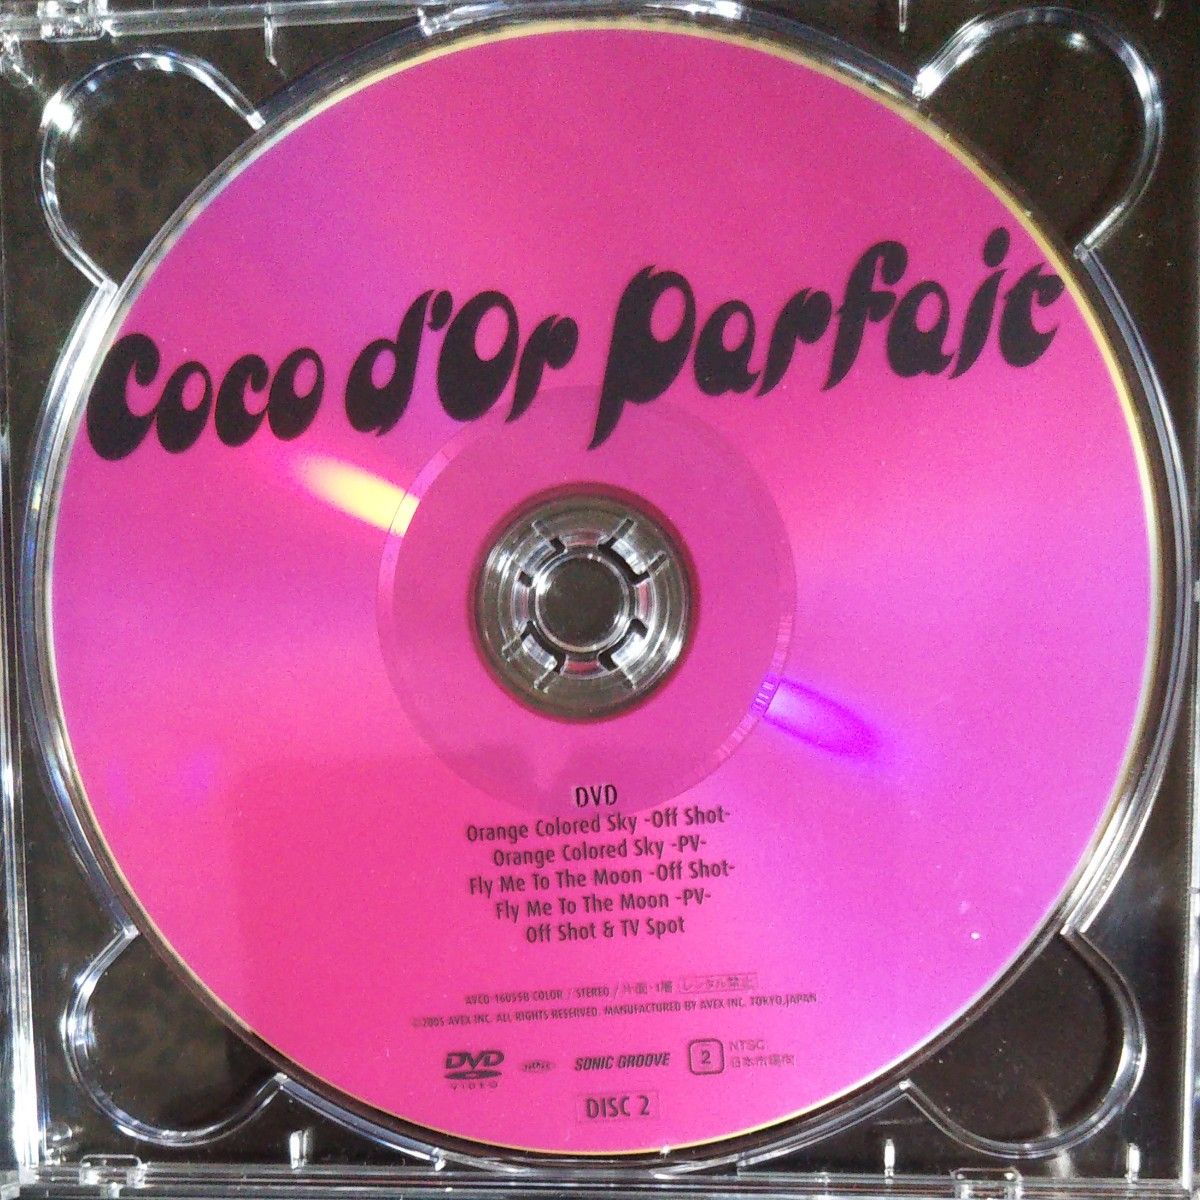 Coco d'Or Parfeic  JazzアルバムCD            (全 CD:19曲 + DVD:5曲)